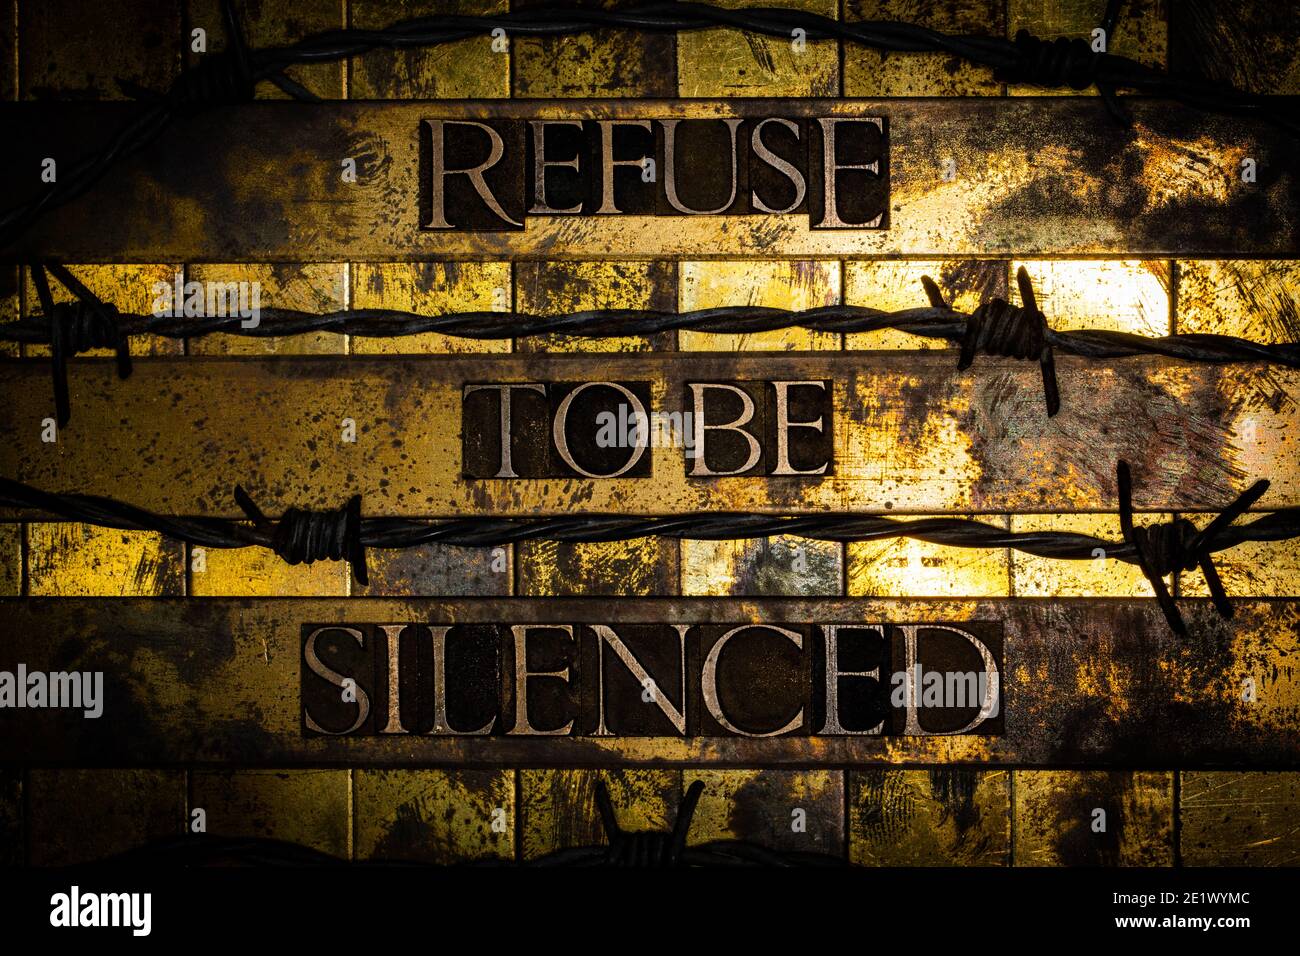 Refuse to be Silenced text on vintaged textured copper and gold background Stock Photo